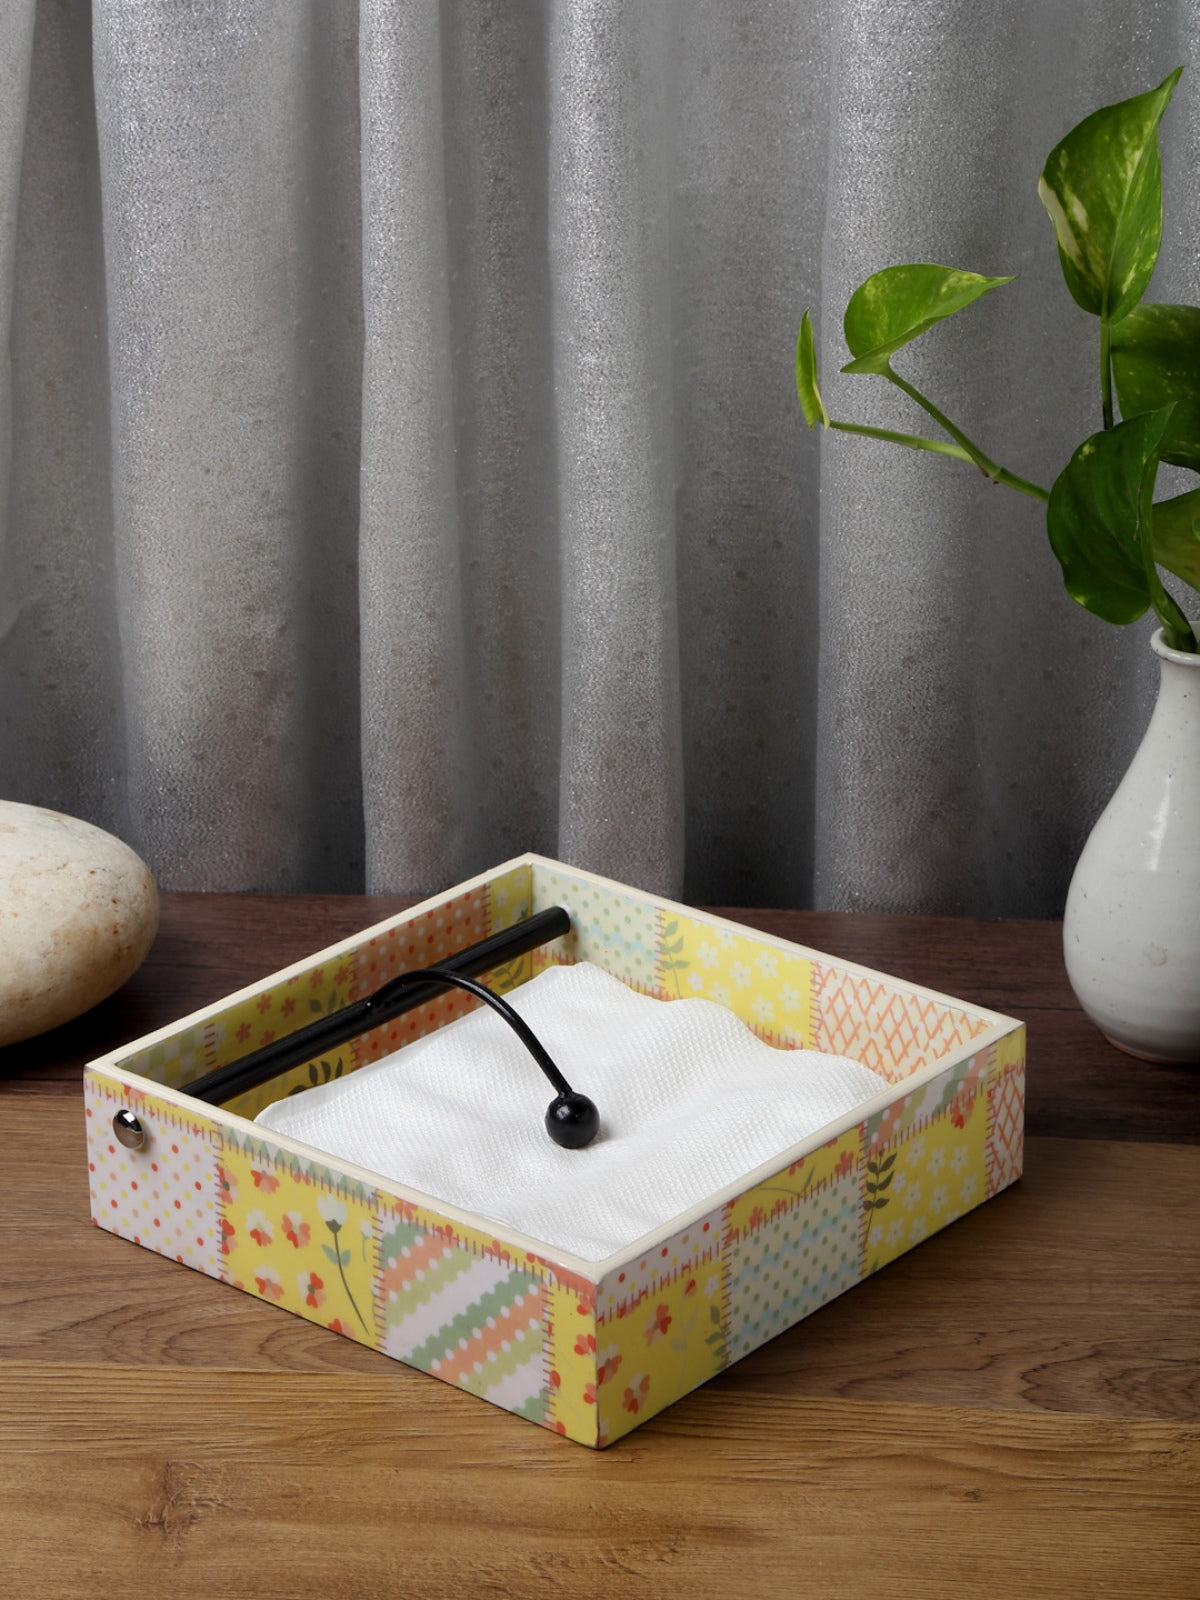 Yellow & Peach Floral Patterned Wooden Tissue Square Tray